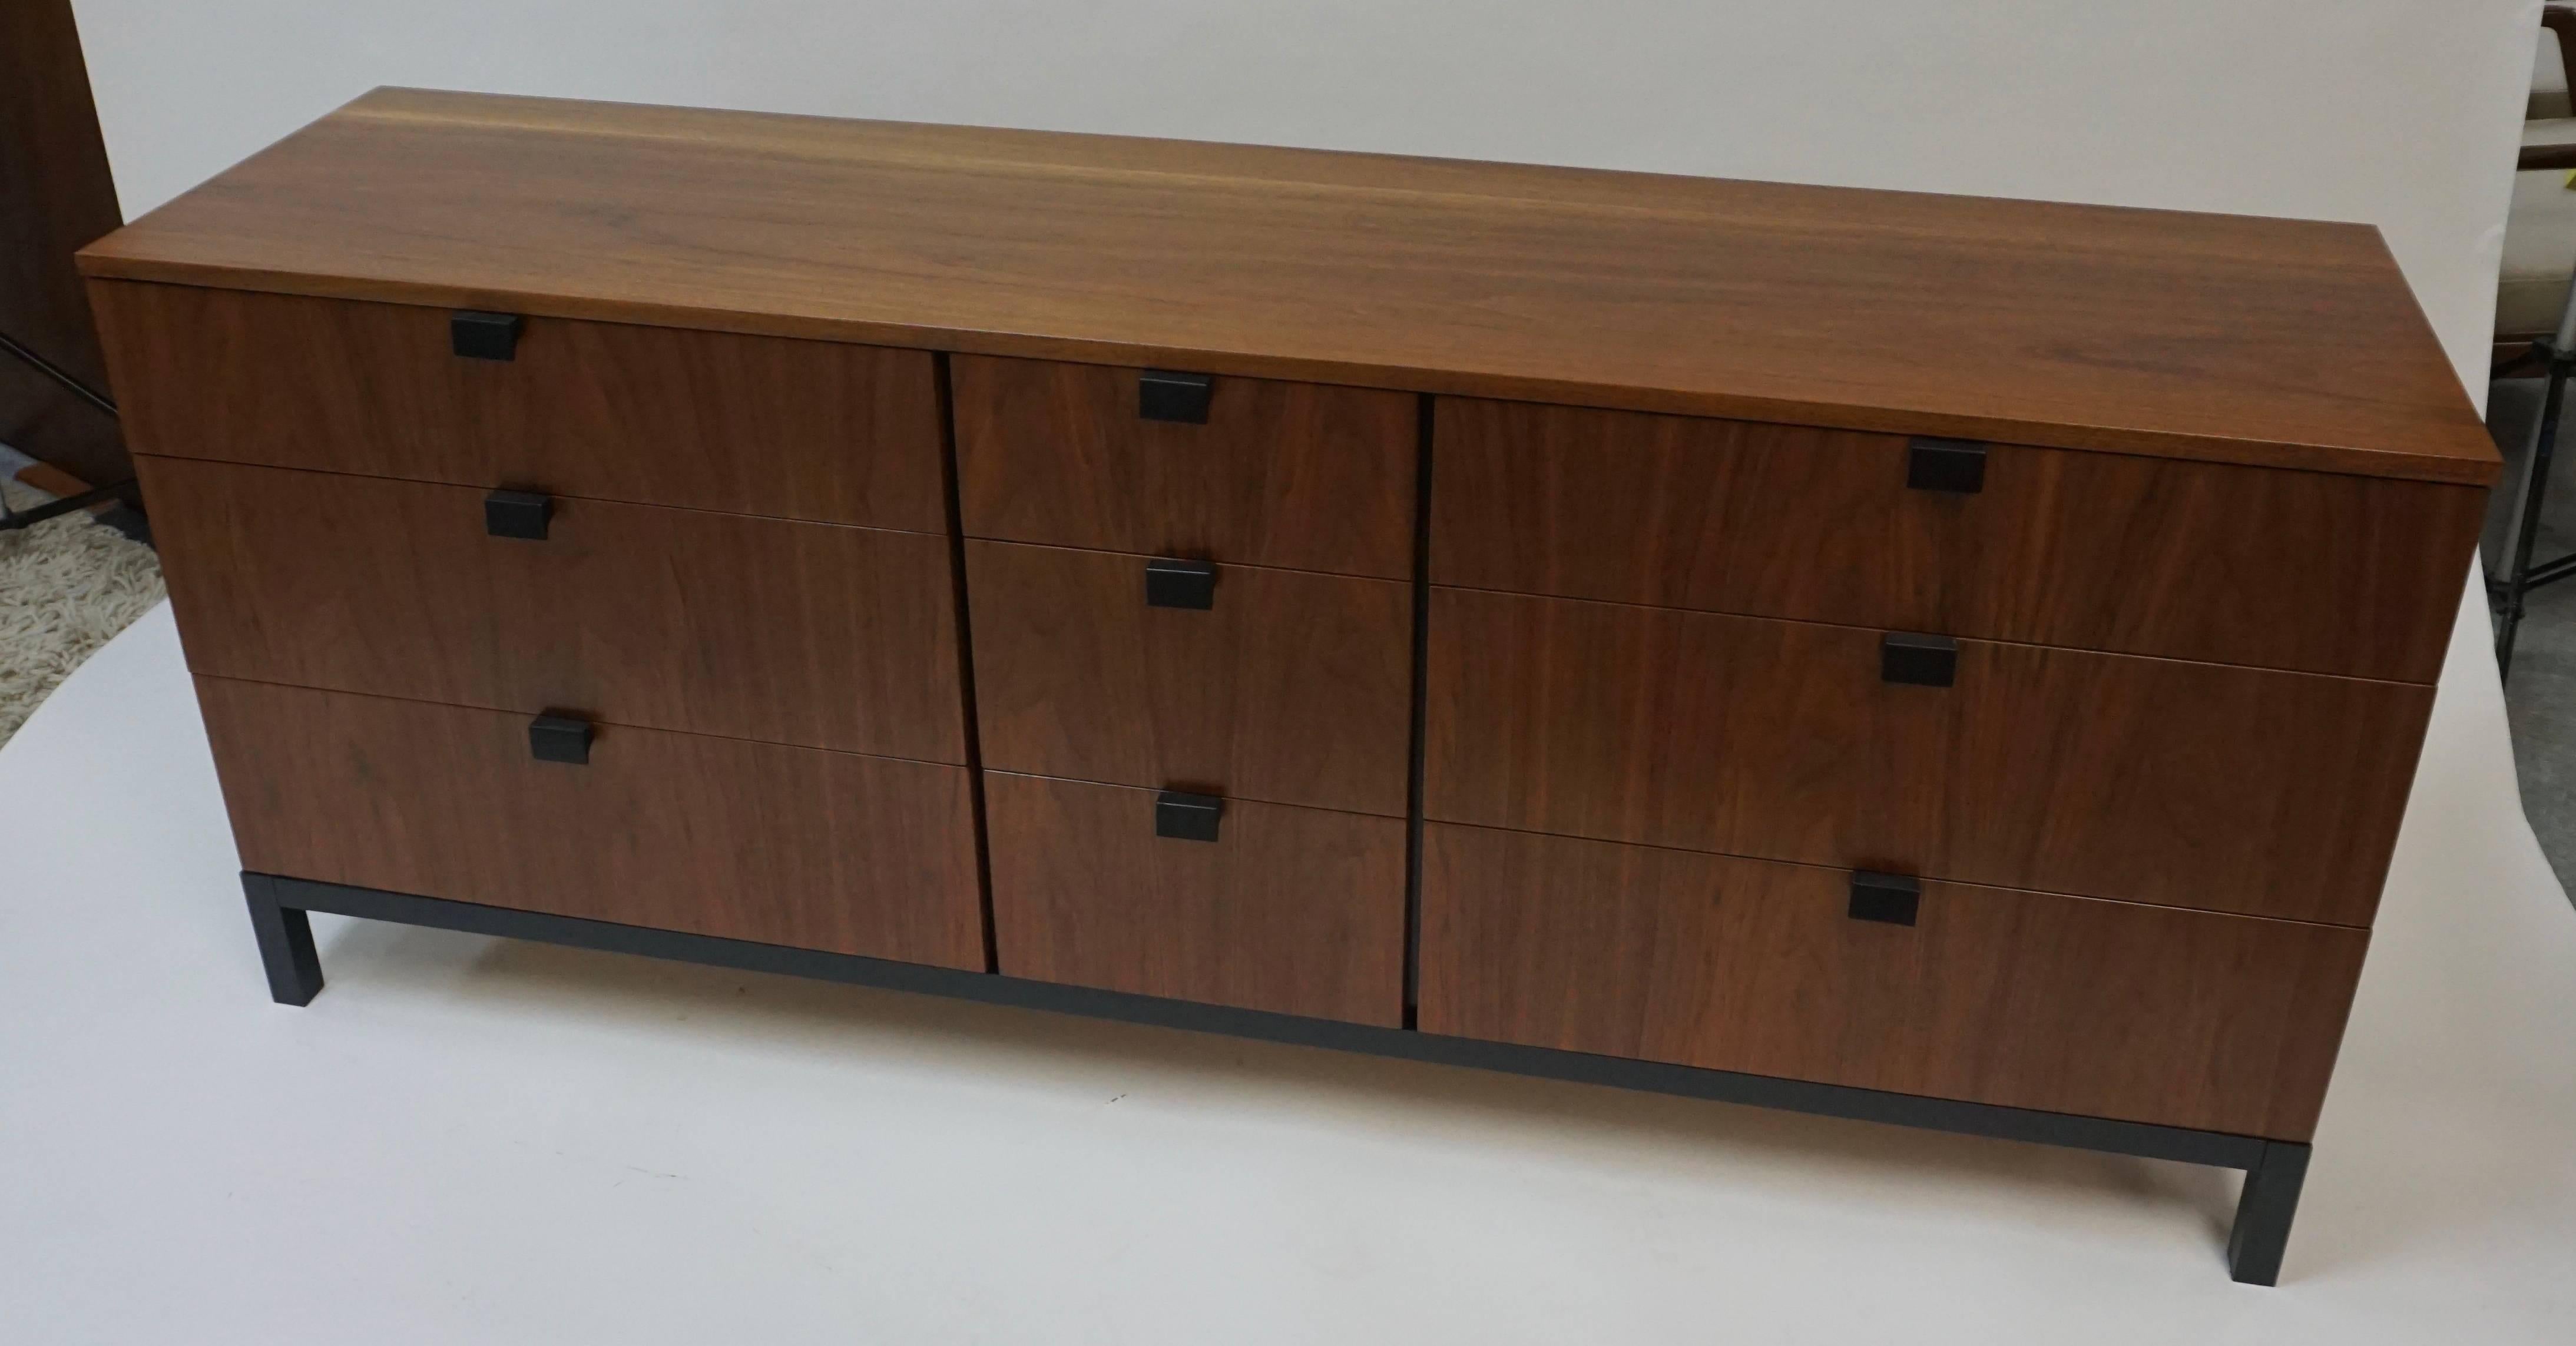 Restored condition. Walnut. Nice warm red-brown color with some yellow tones. Drawers all work smoothly. Wooden drawer pulls. Great vibrant grain on top and drawer fronts. Just a couple very minor marks on surface under the new finish.